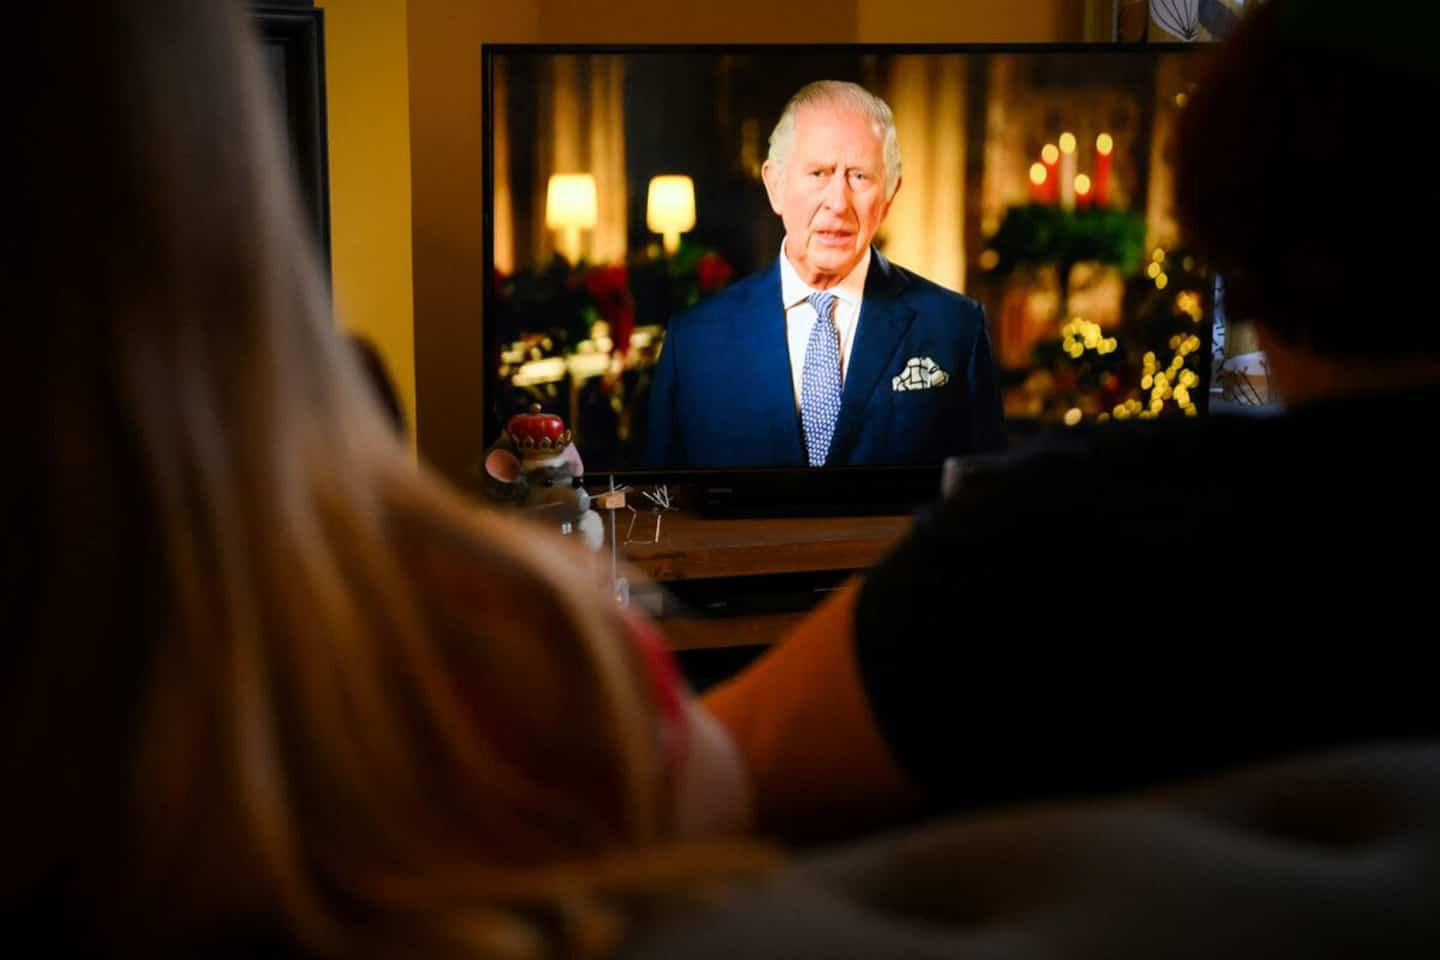 In his first Christmas message, King Charles III advocates "solidarity"